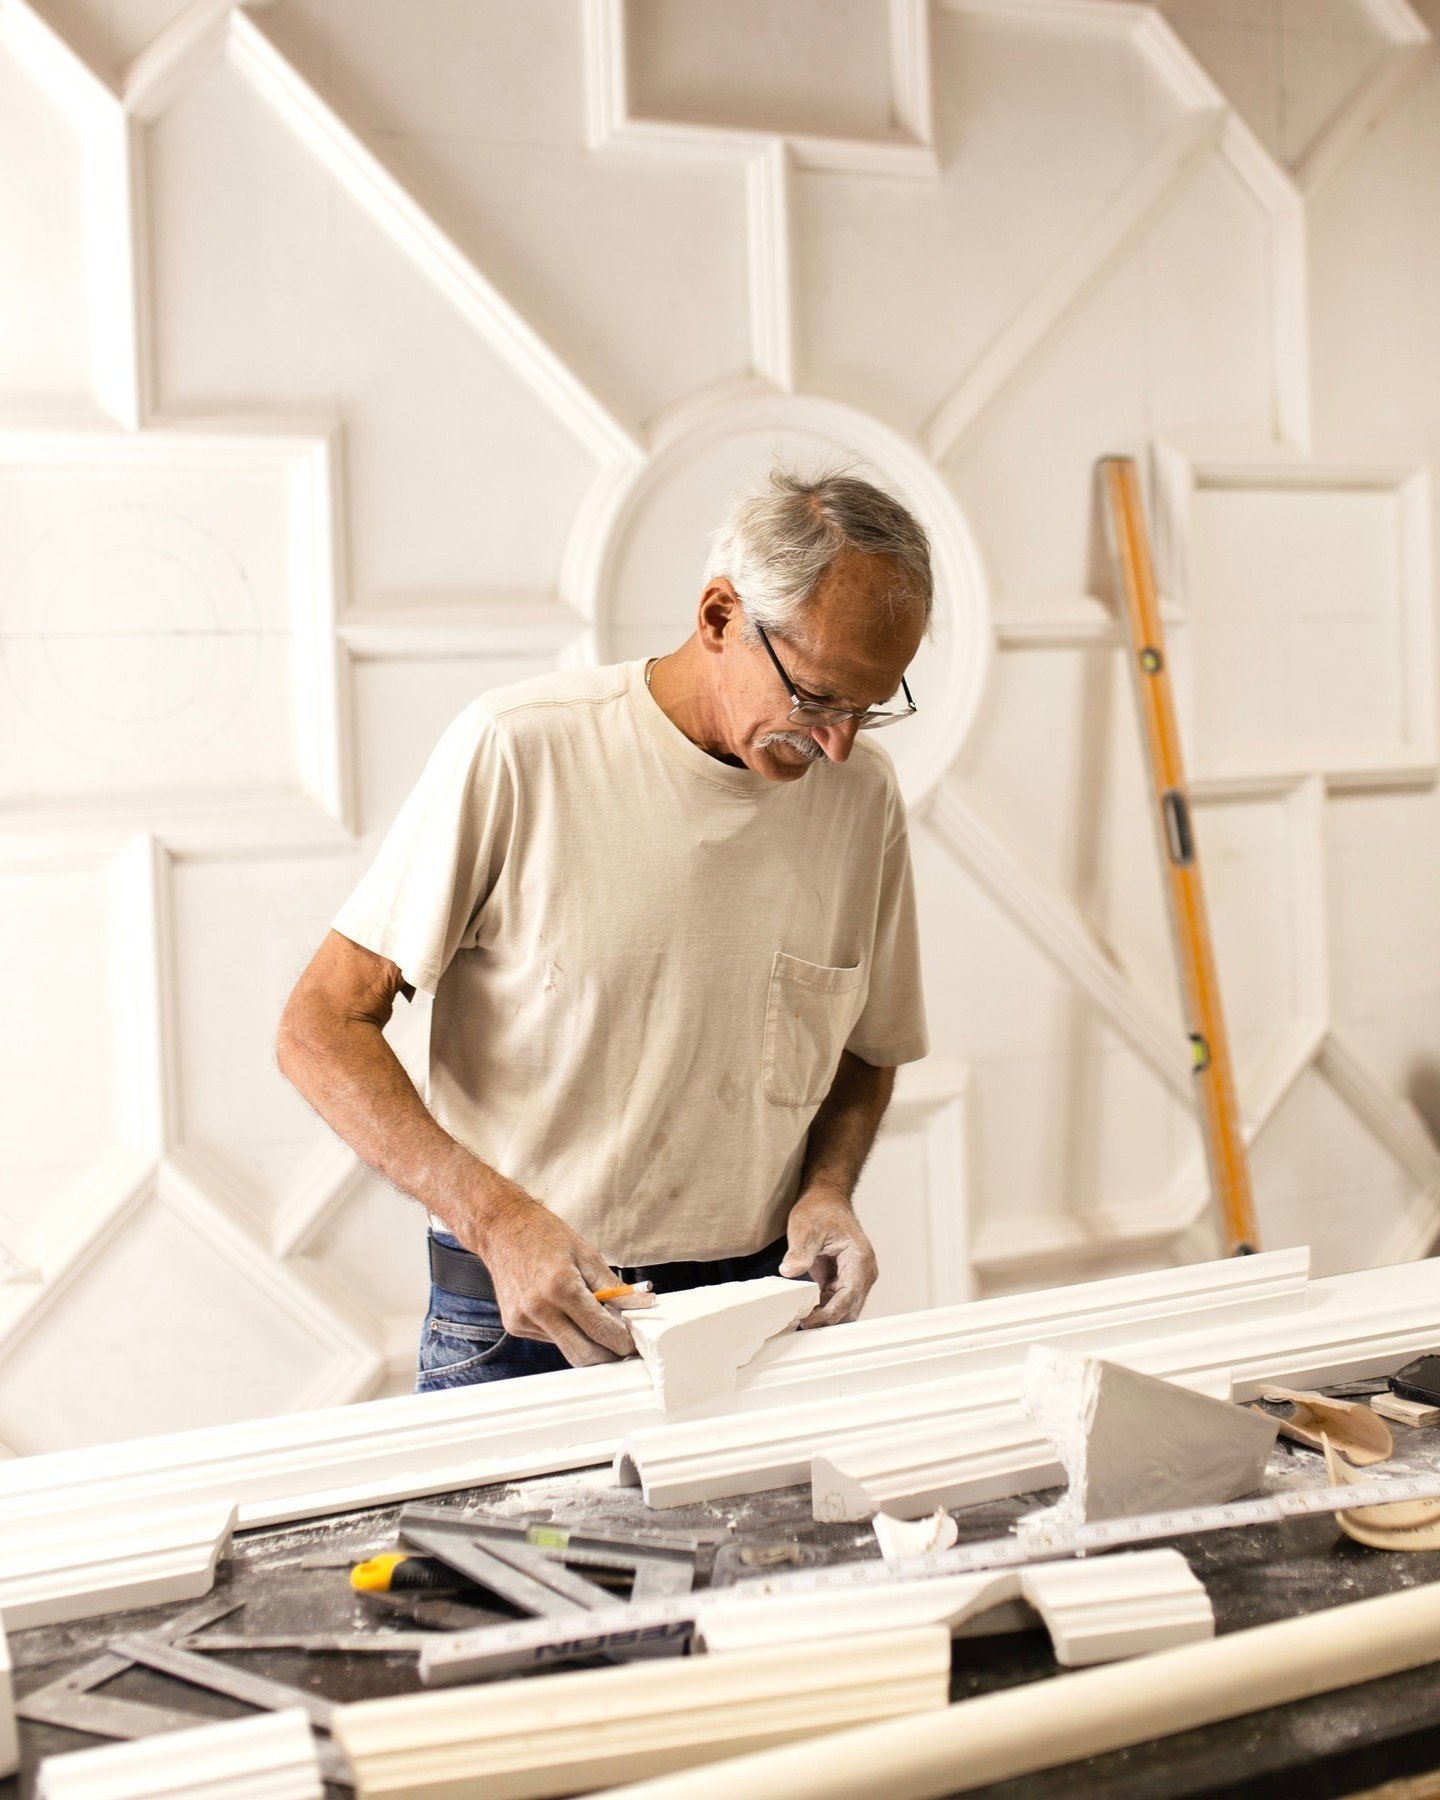 Professor Steve Kester, Chair of Plaster at ACBA, emphasizes, &quot;Most people think of plaster as flatwork like walls and ceilings, but plaster encompasses so much more...&quot;⁠
⁠
Stephen Kester's passion for preservation and restoration began ear